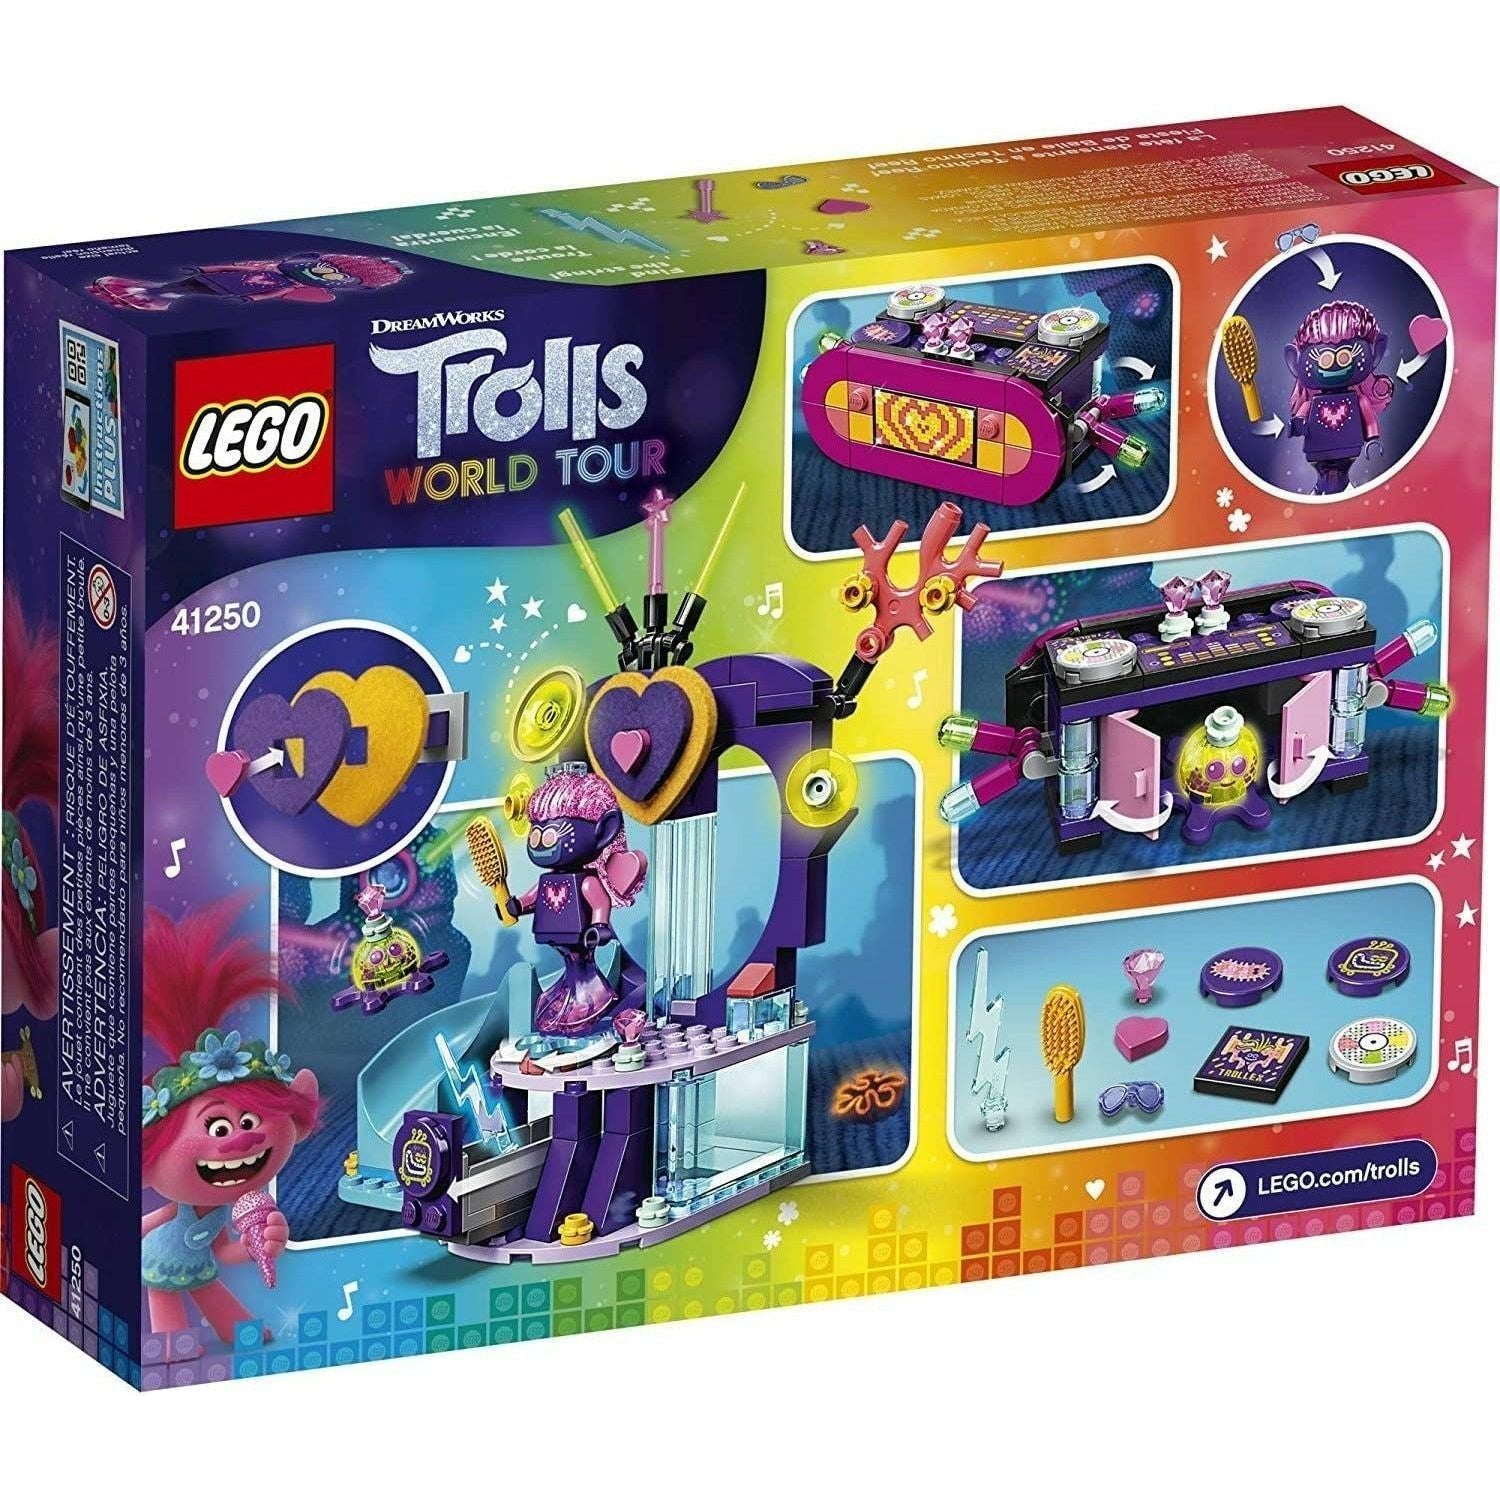 LEGO 41250 Trolls World Tour Techno Reef Dance Party - BumbleToys - 5-7 Years, Arabic Triangle Trading, Girls, LEGO, Trolls, Trolls World Tour